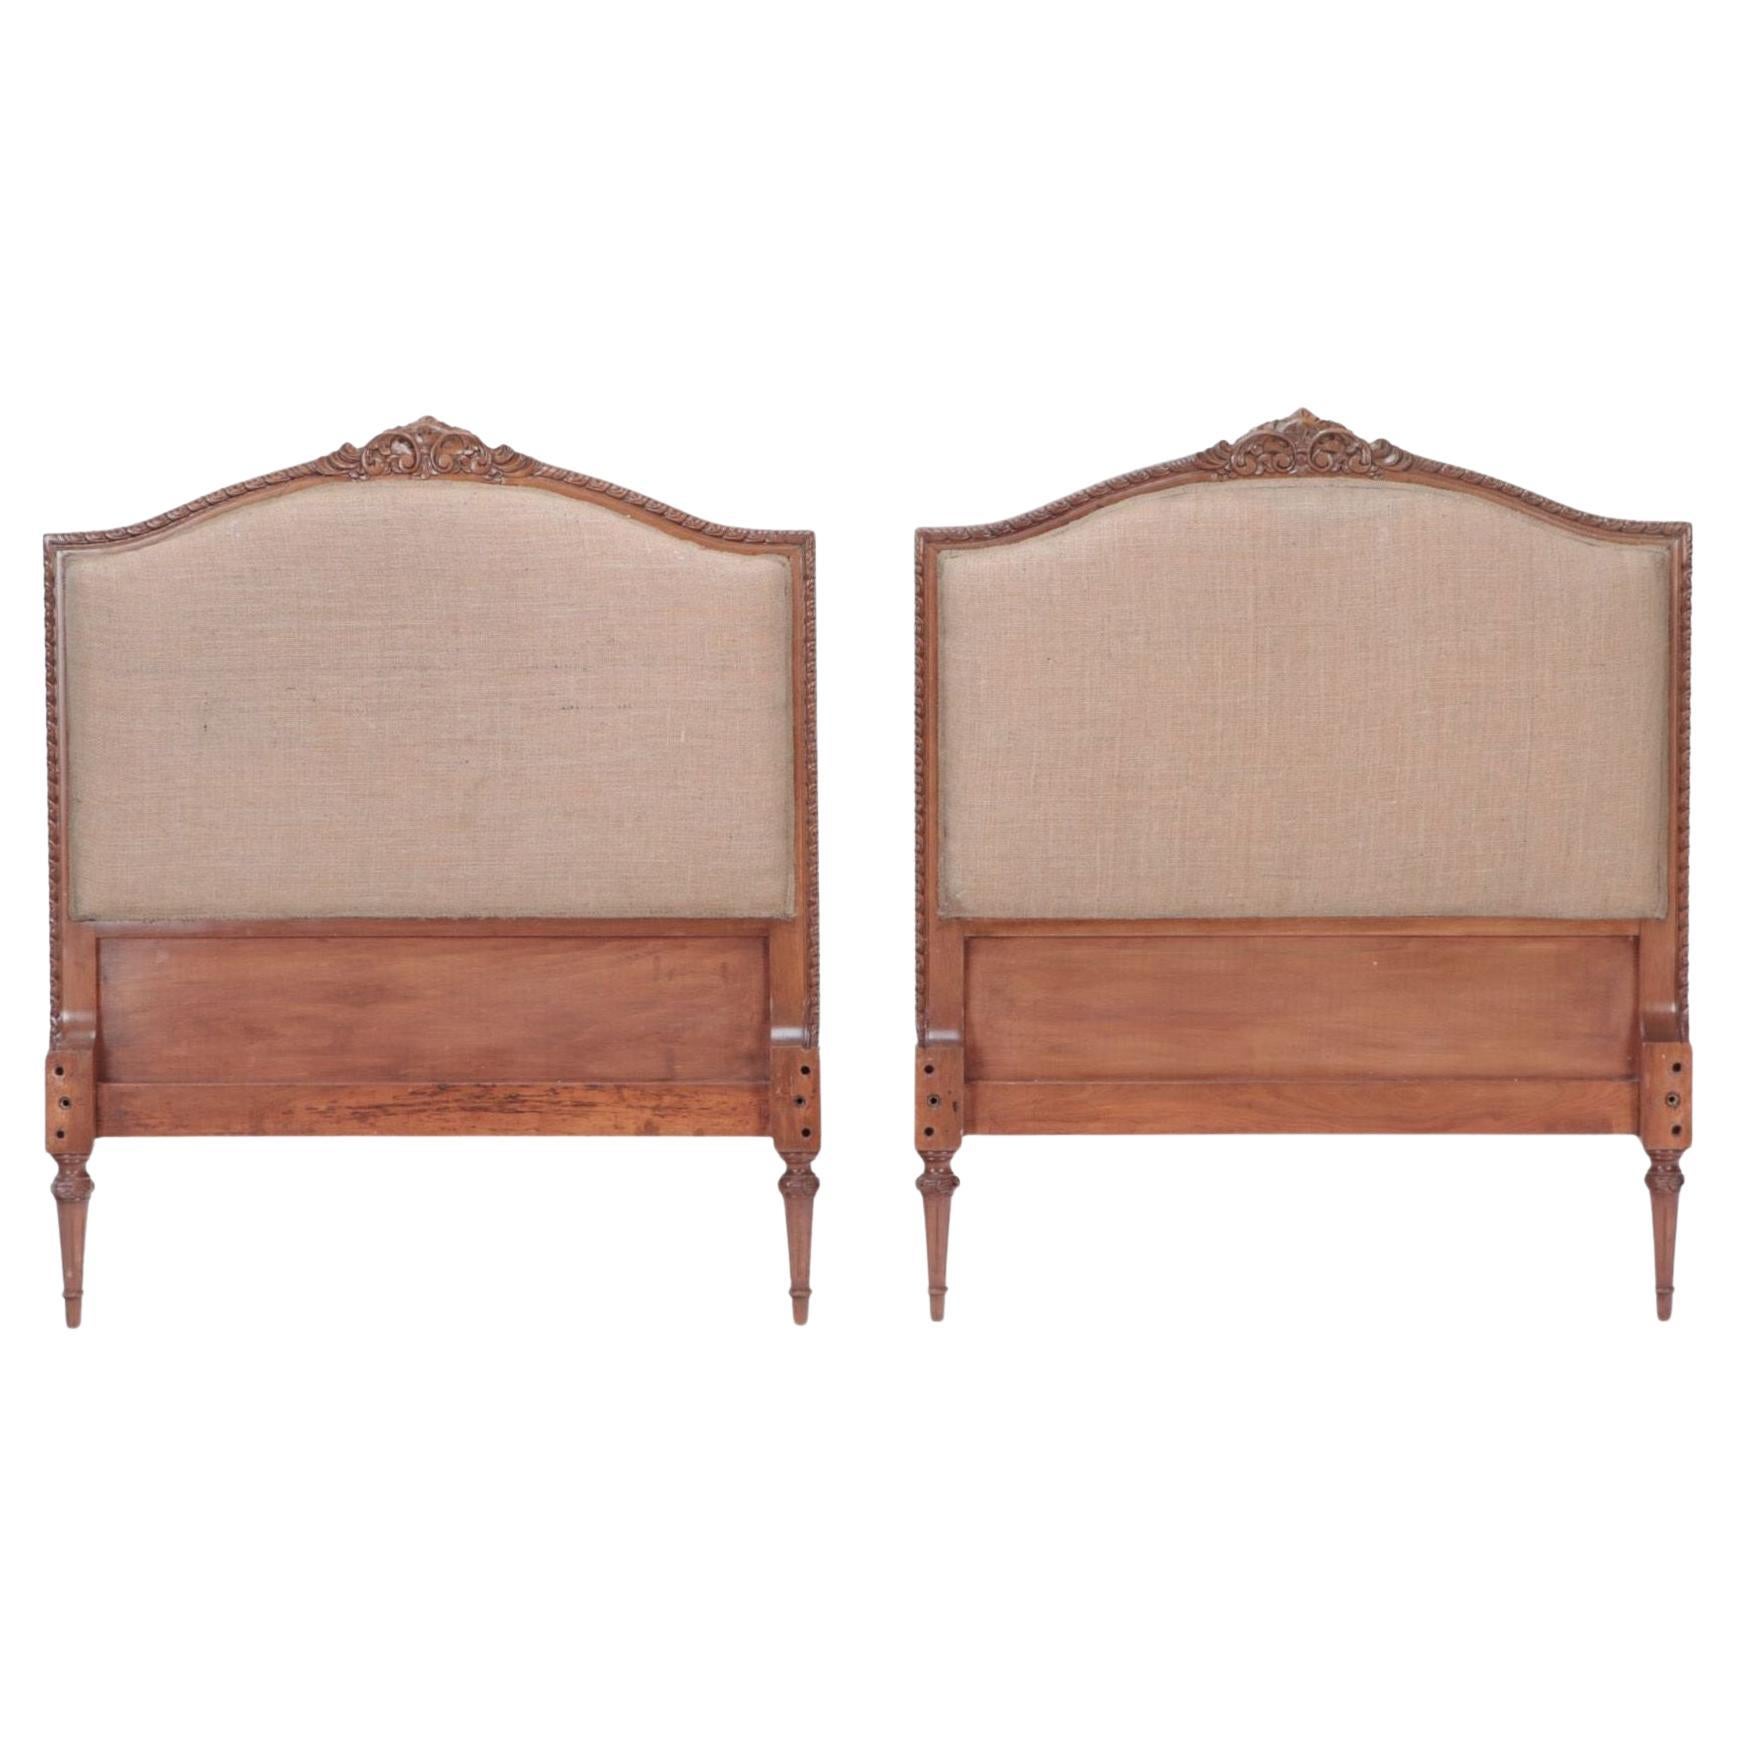 Pair of French Louis XVI Style Twin Beds Headboards in Burlap, circa 1950 For Sale